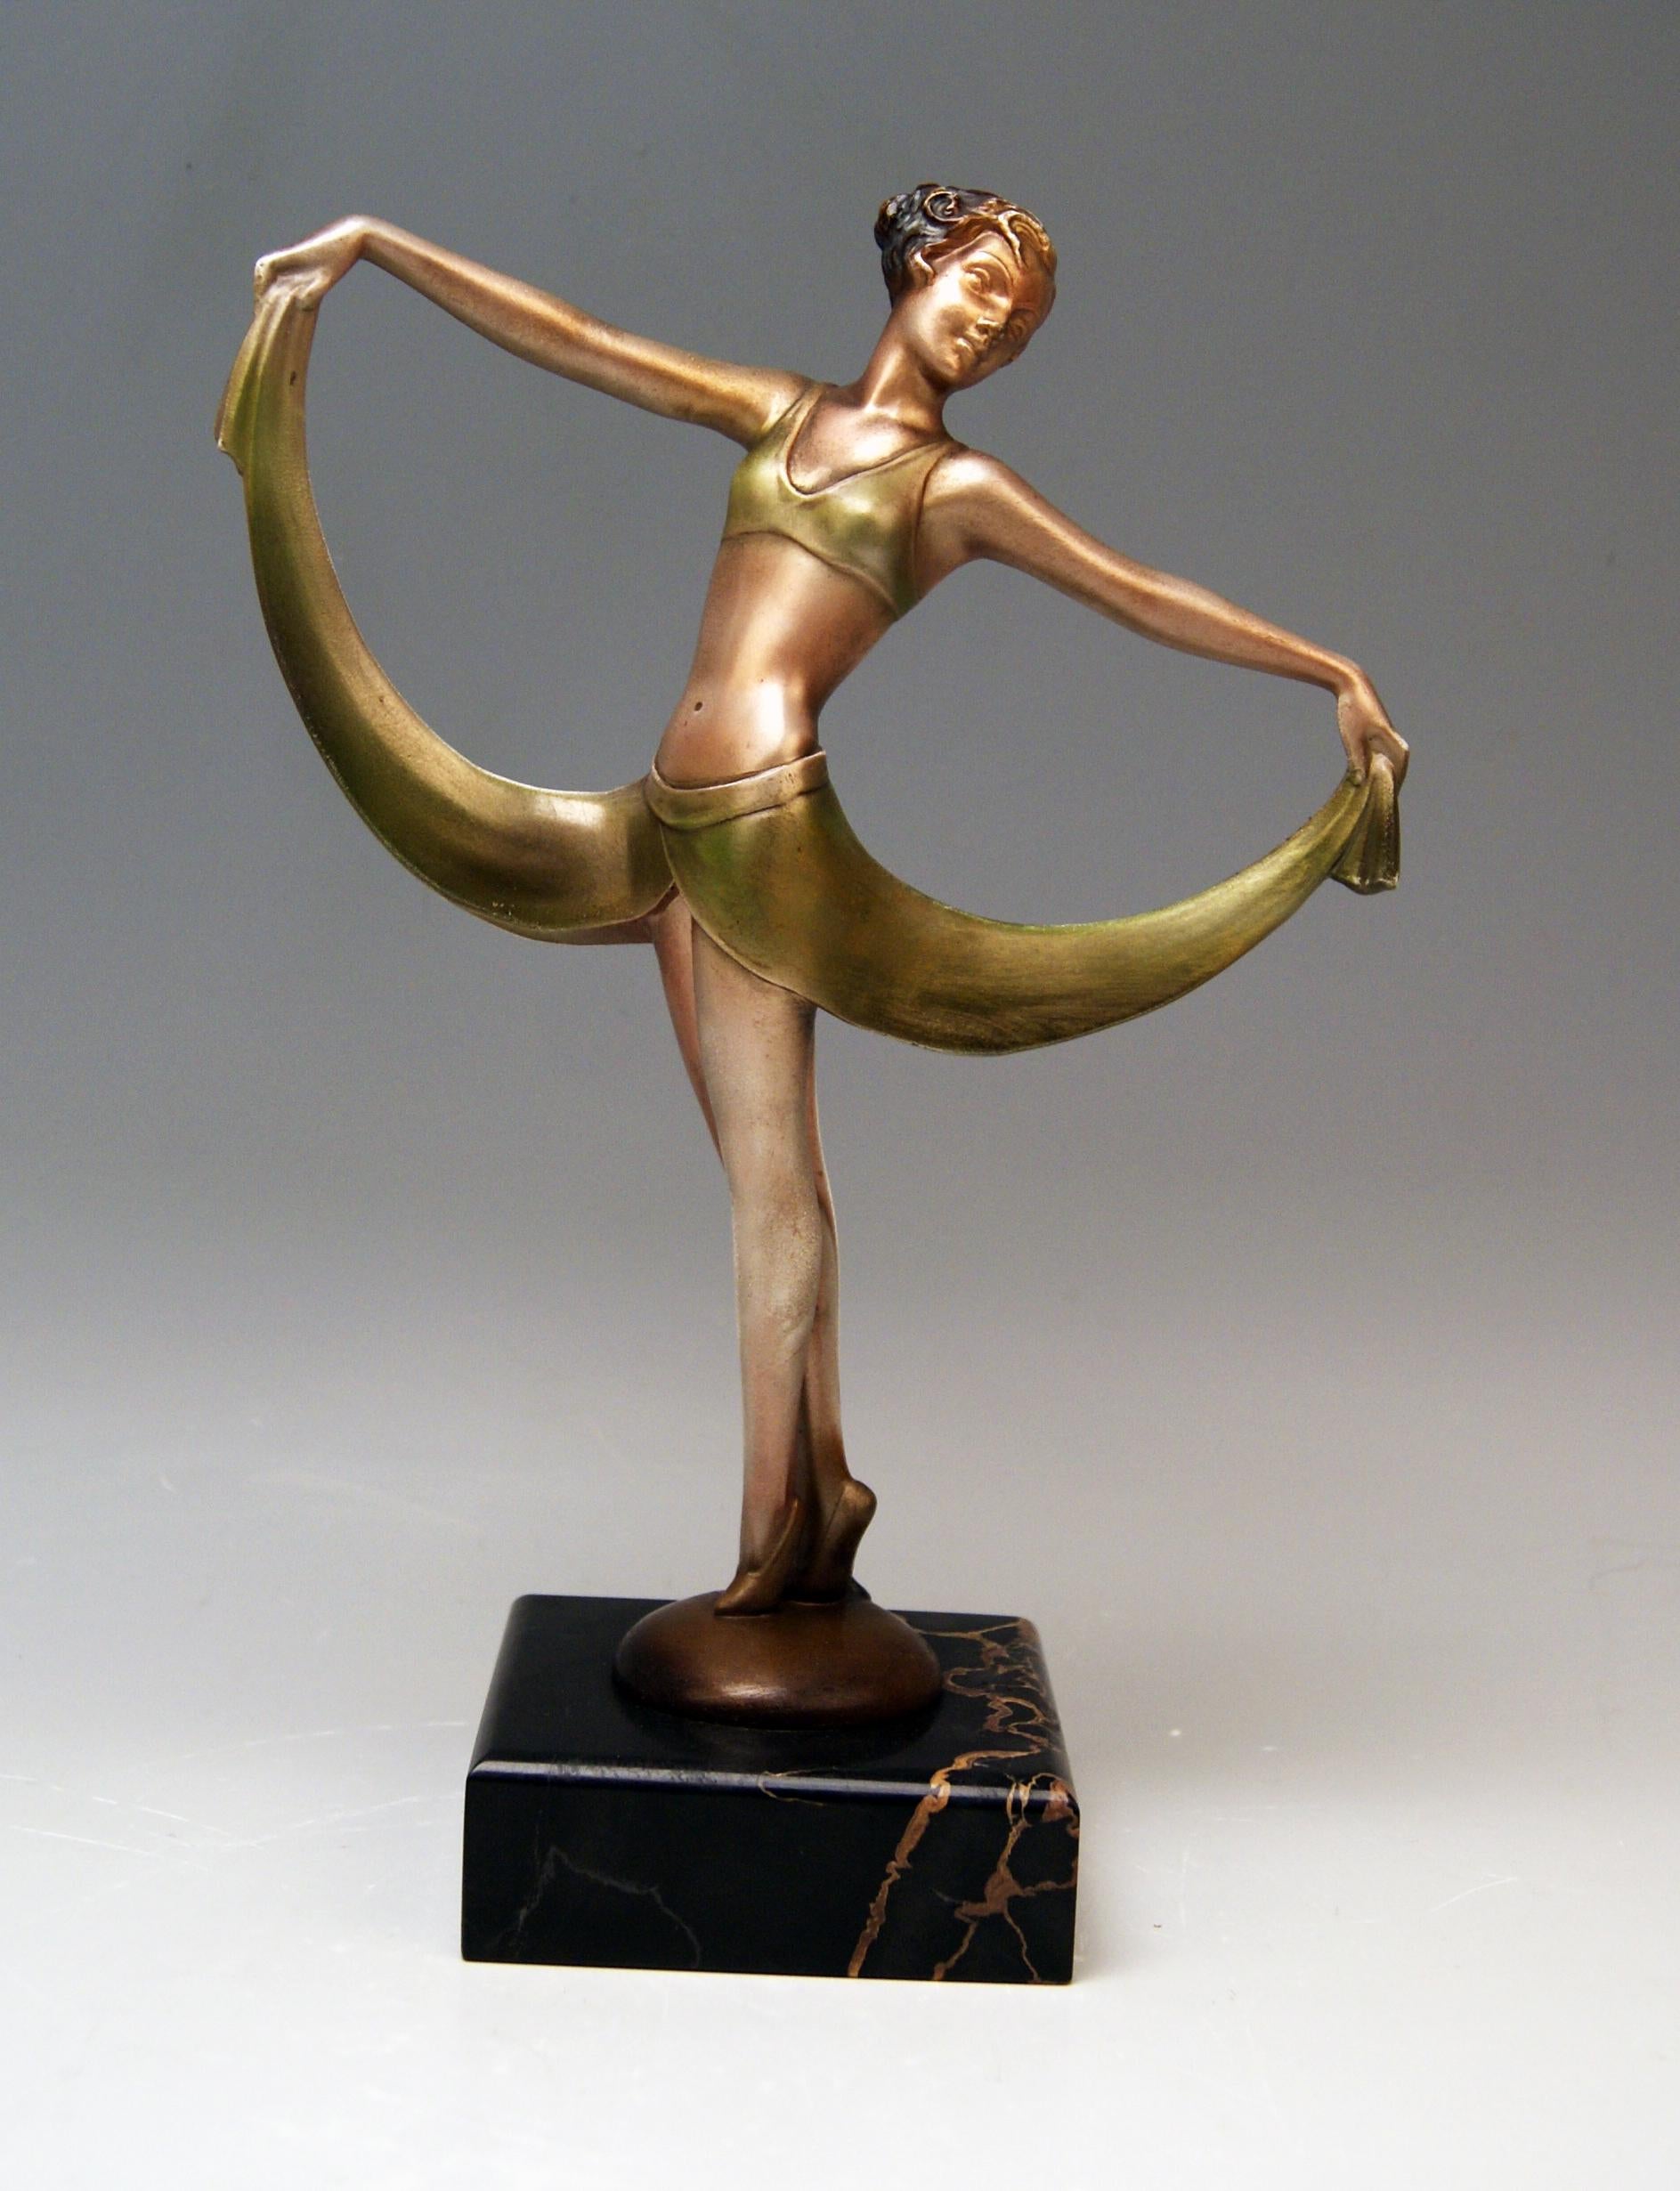 Vienna bronze finest Art Deco lady dancer.

Technique:
Bronze casting / mold
cold painted

Designed by Josef Lorenzl (1892 - 1950) / one of most important designers having been active for Goldscheider manufactory as well as for Vienna Bronze